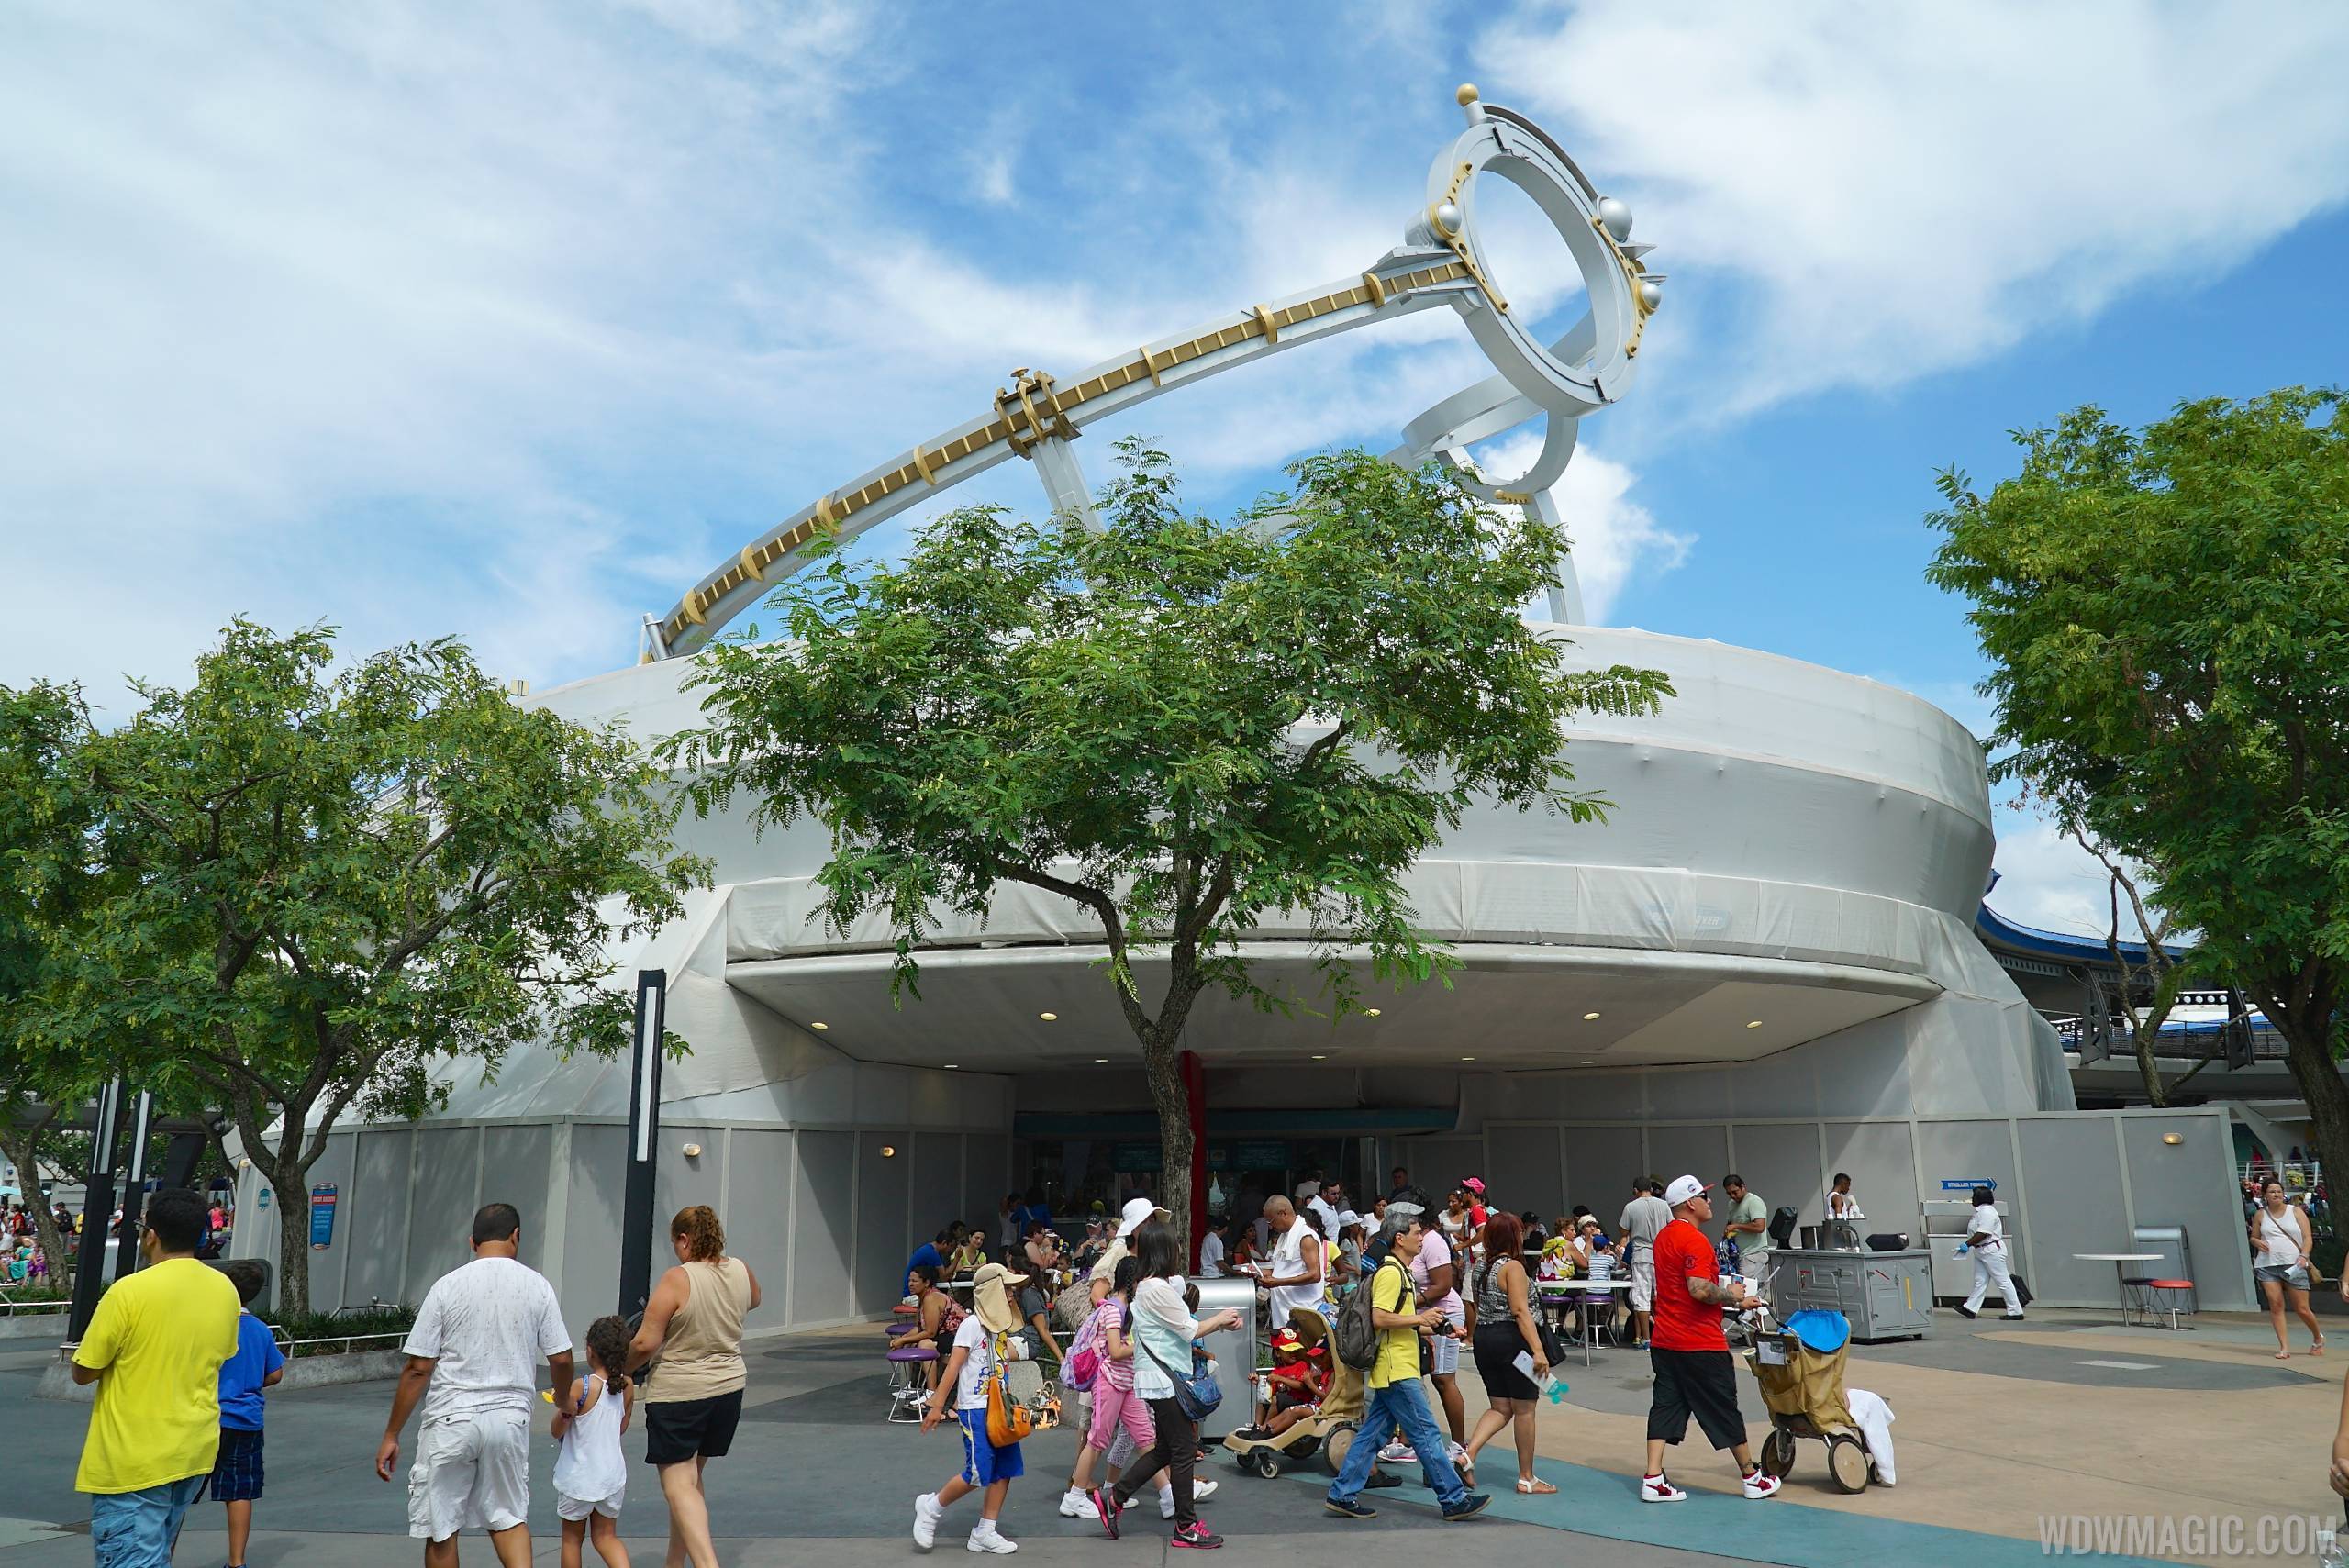 Astro Orbiter refurbishment extended by a week